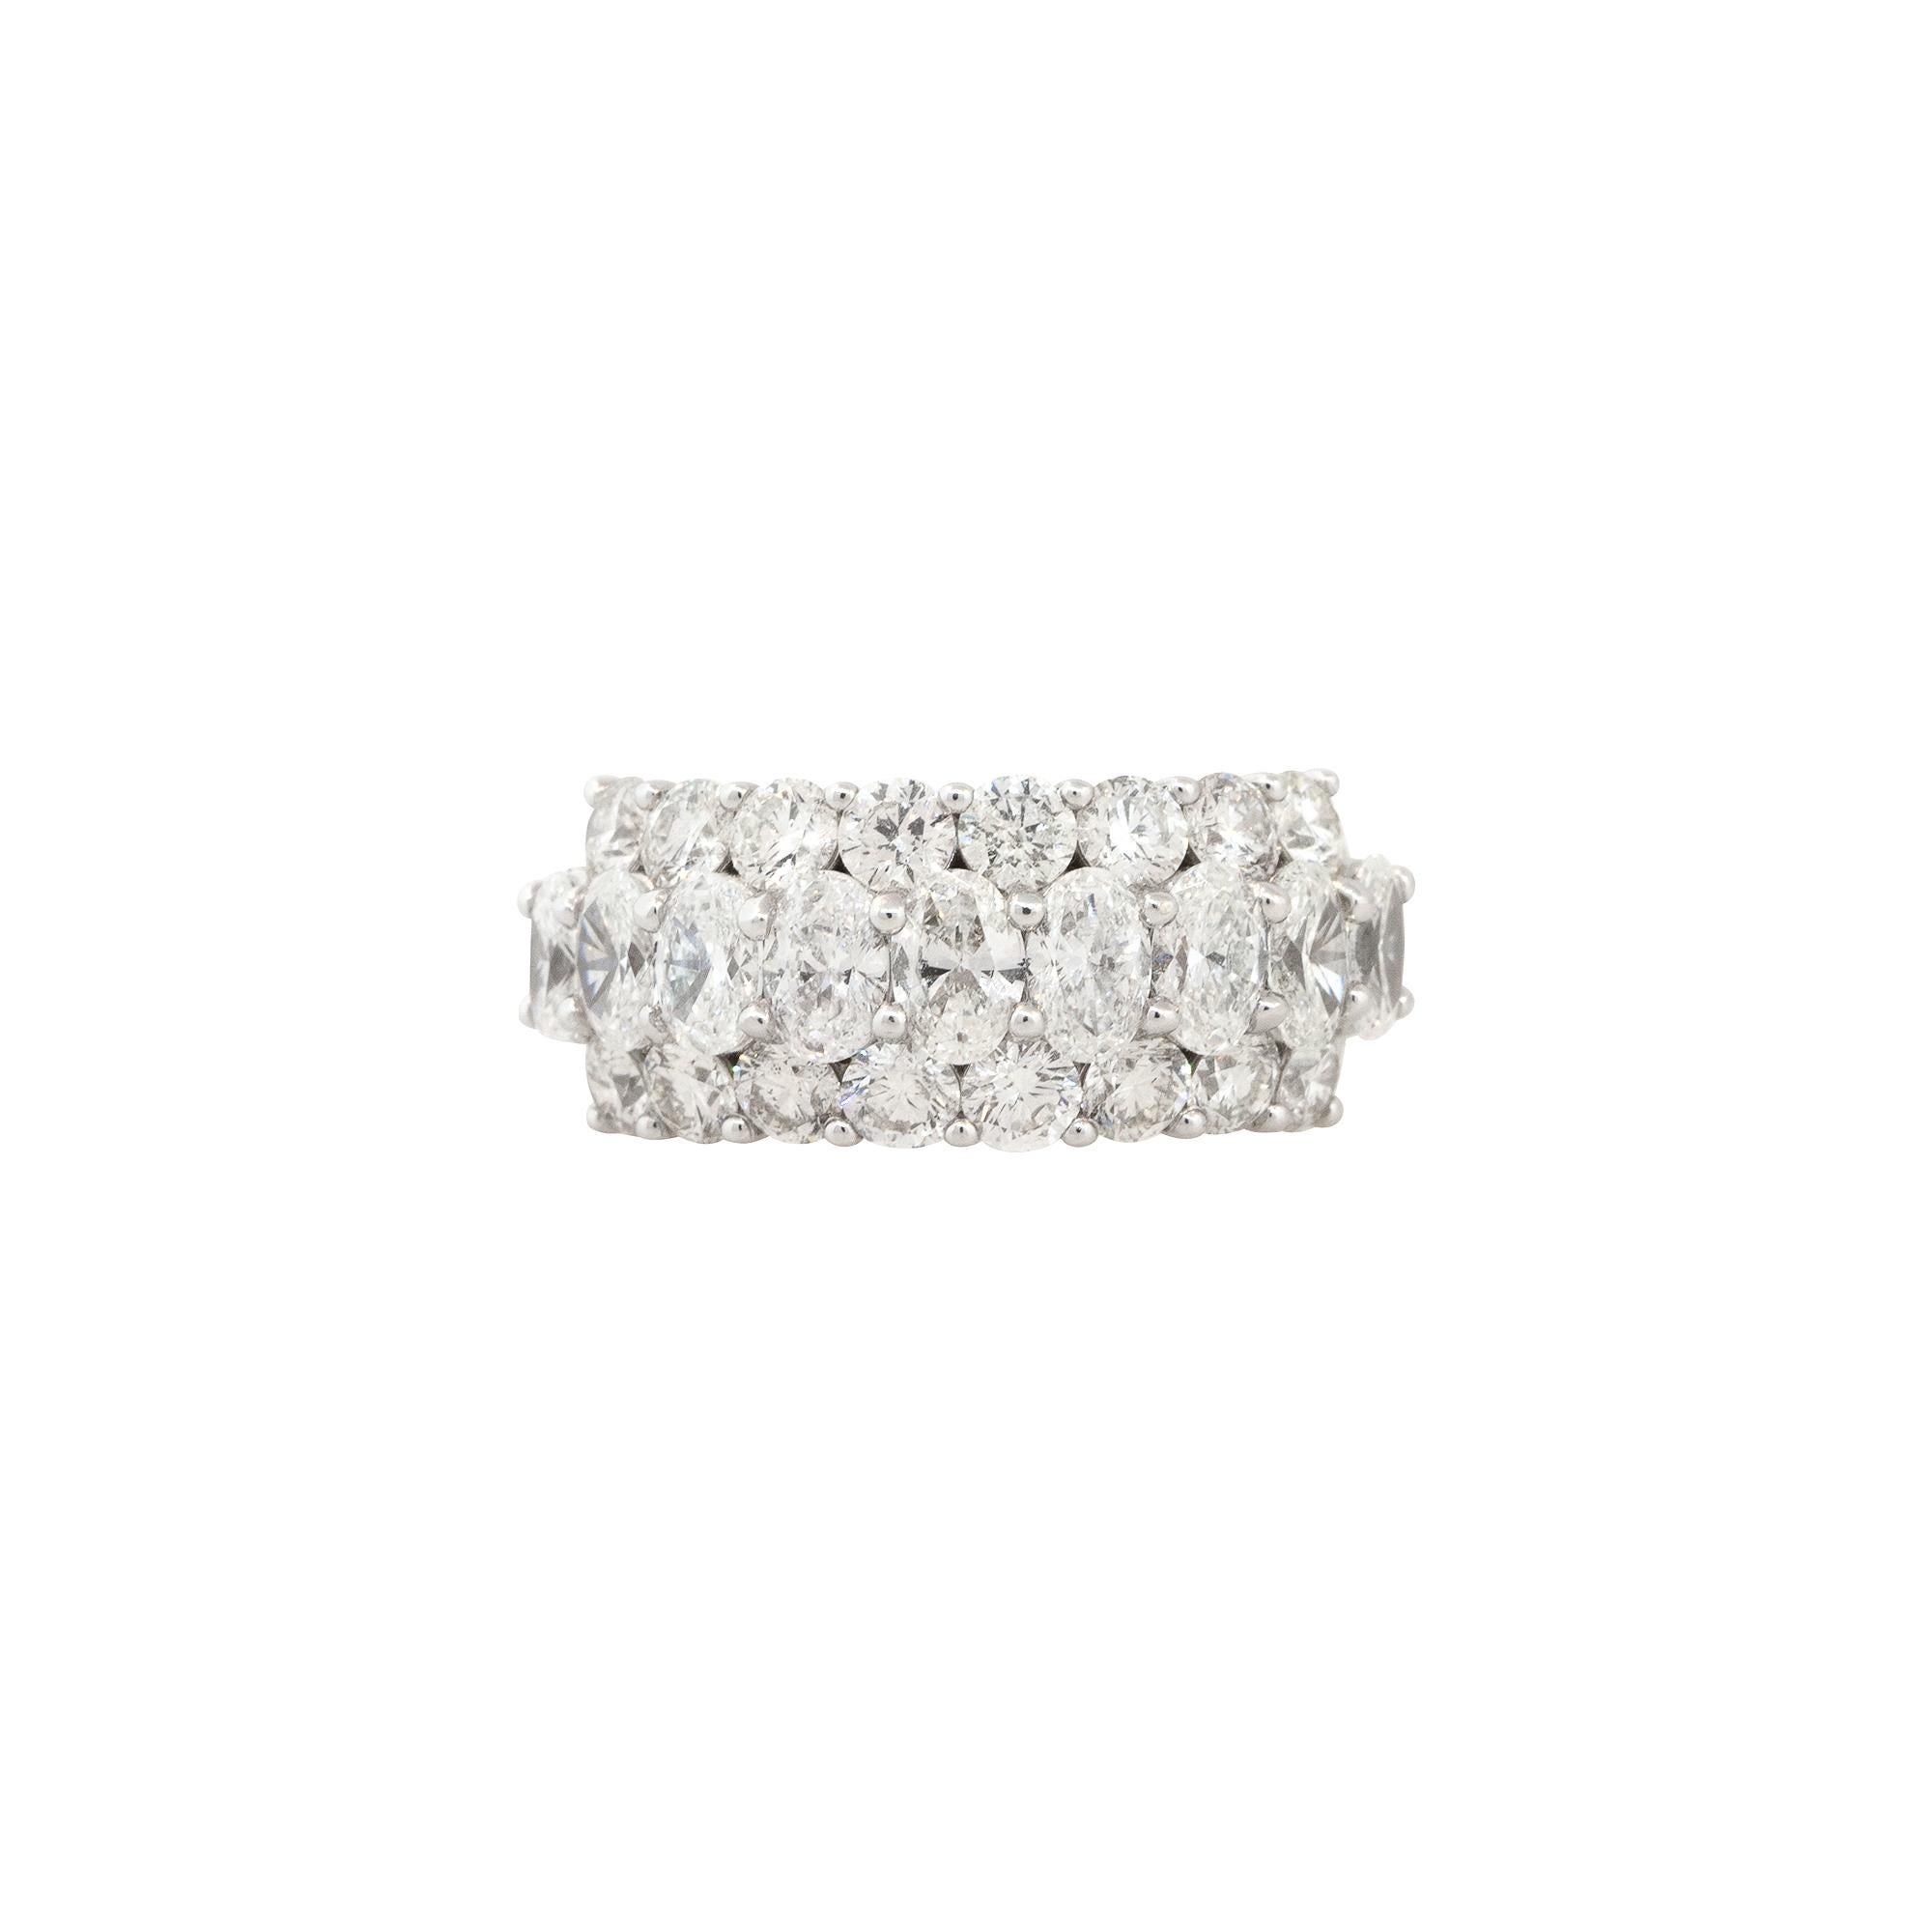 18k White Gold 4.32ctw Round and Oval Cut Half-Way Diamond Band

Raymond Lee Jewelers in Boca Raton -- South Florida’s destination for diamonds, fine jewelry, antique jewelry, estate pieces, and vintage jewels.

Style: Women's Half-Way Diamond